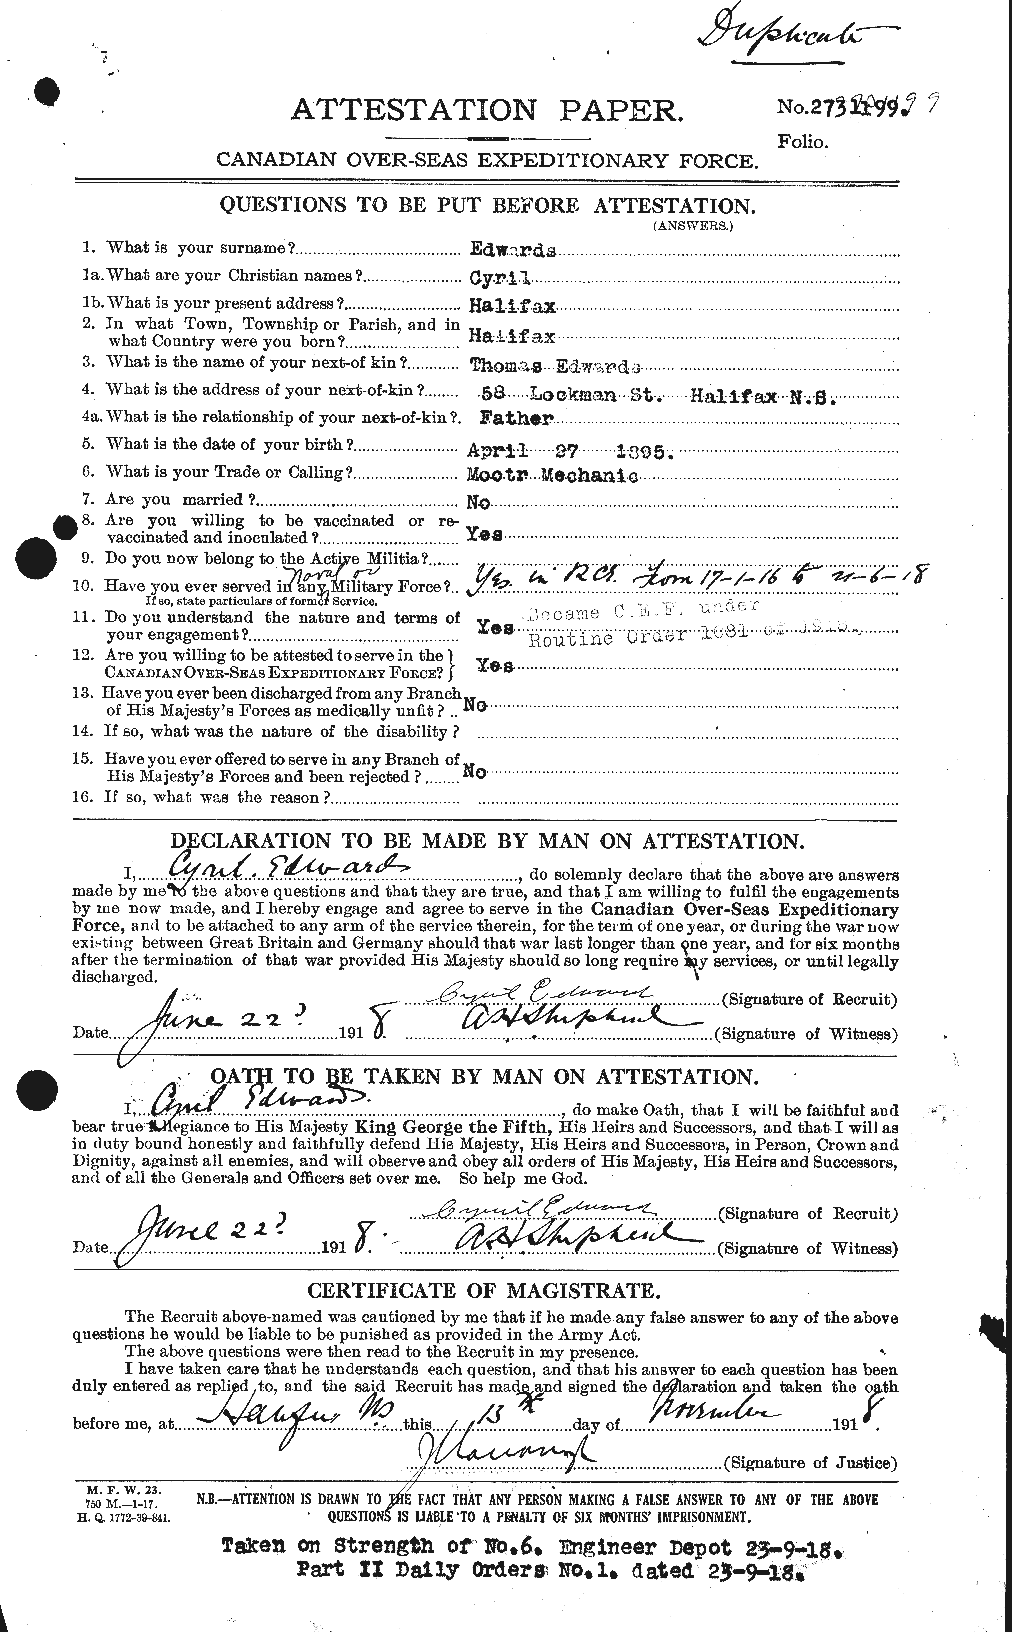 Personnel Records of the First World War - CEF 307861a